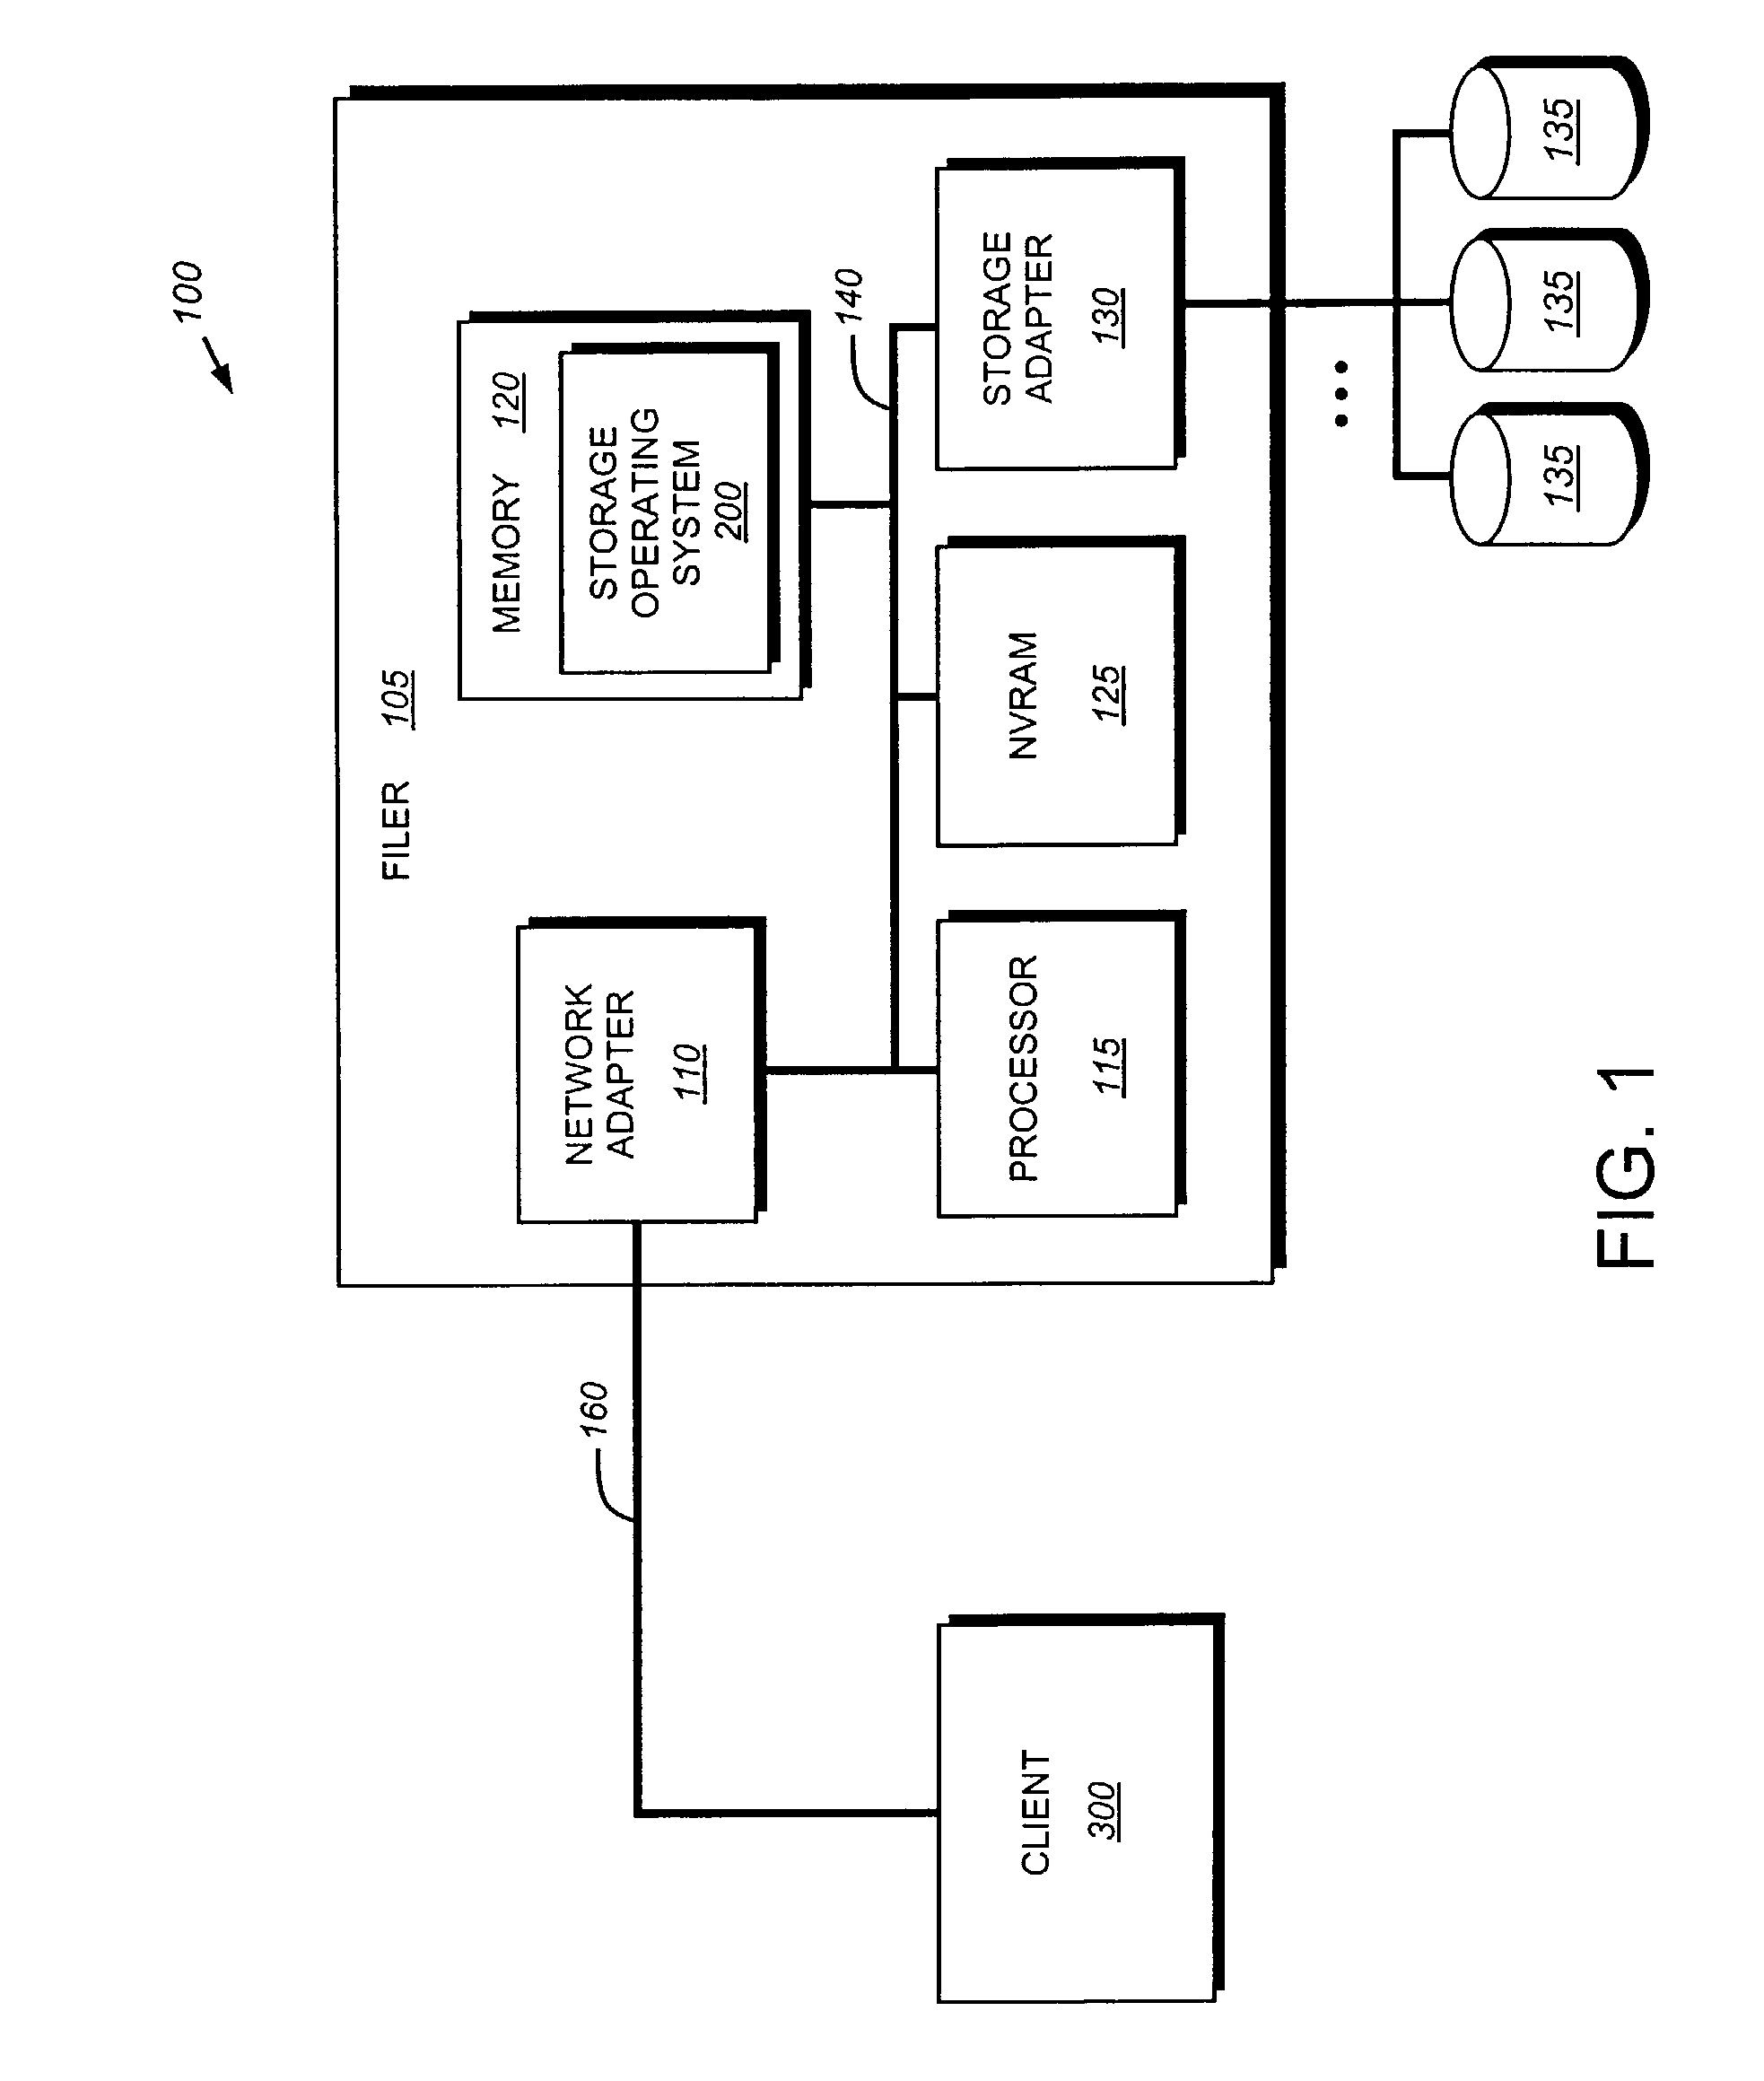 System and method for mapping block-based file operations to file level protocols